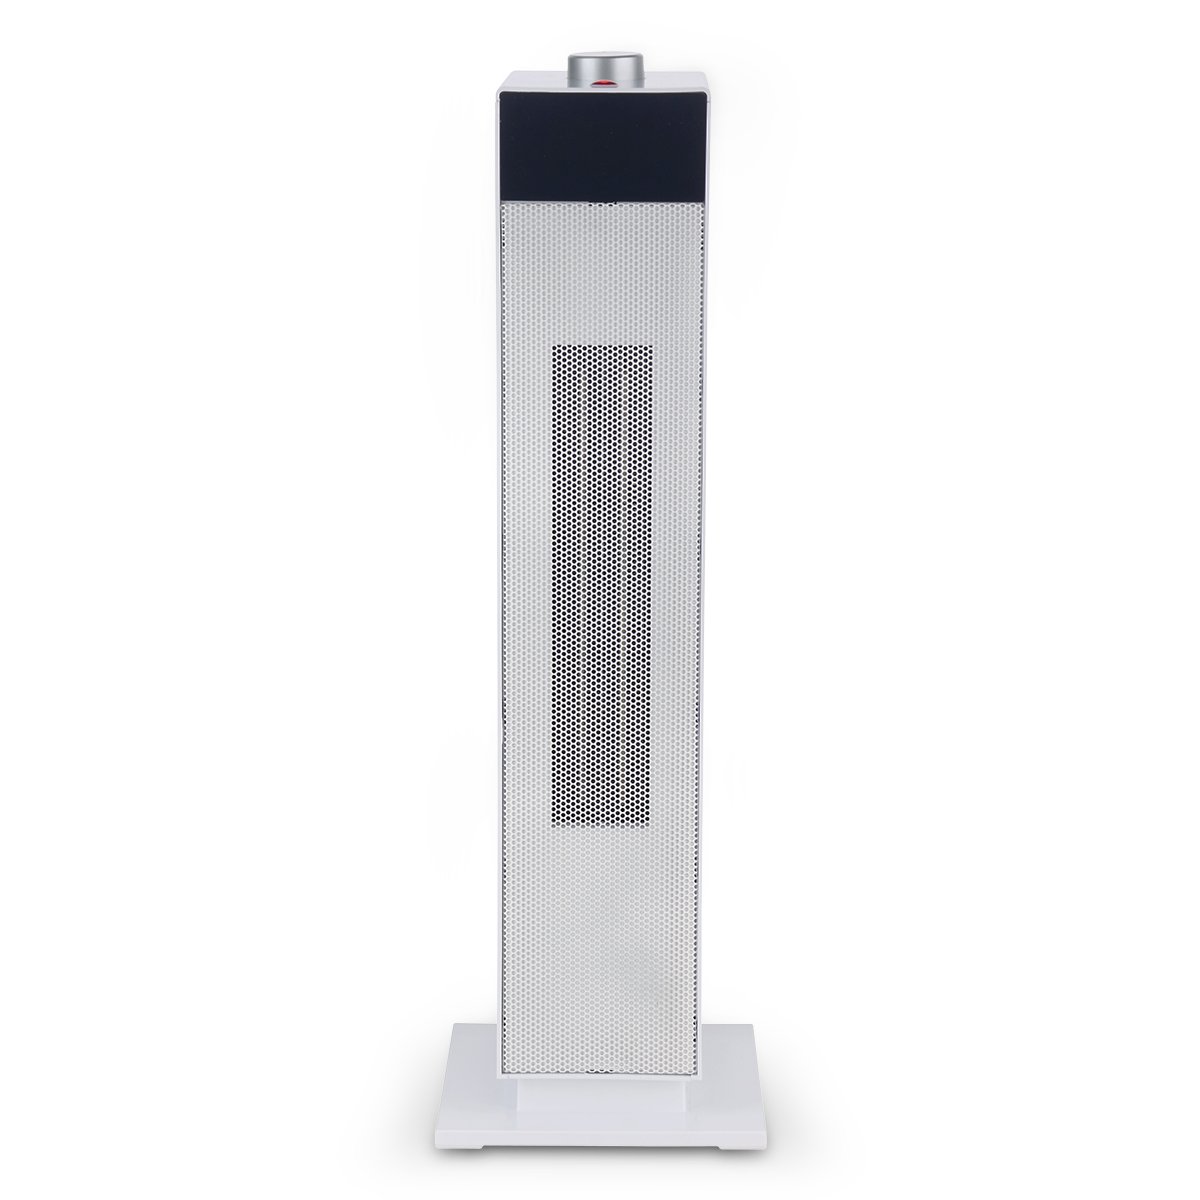 homewares Electric tower heater 2000w white